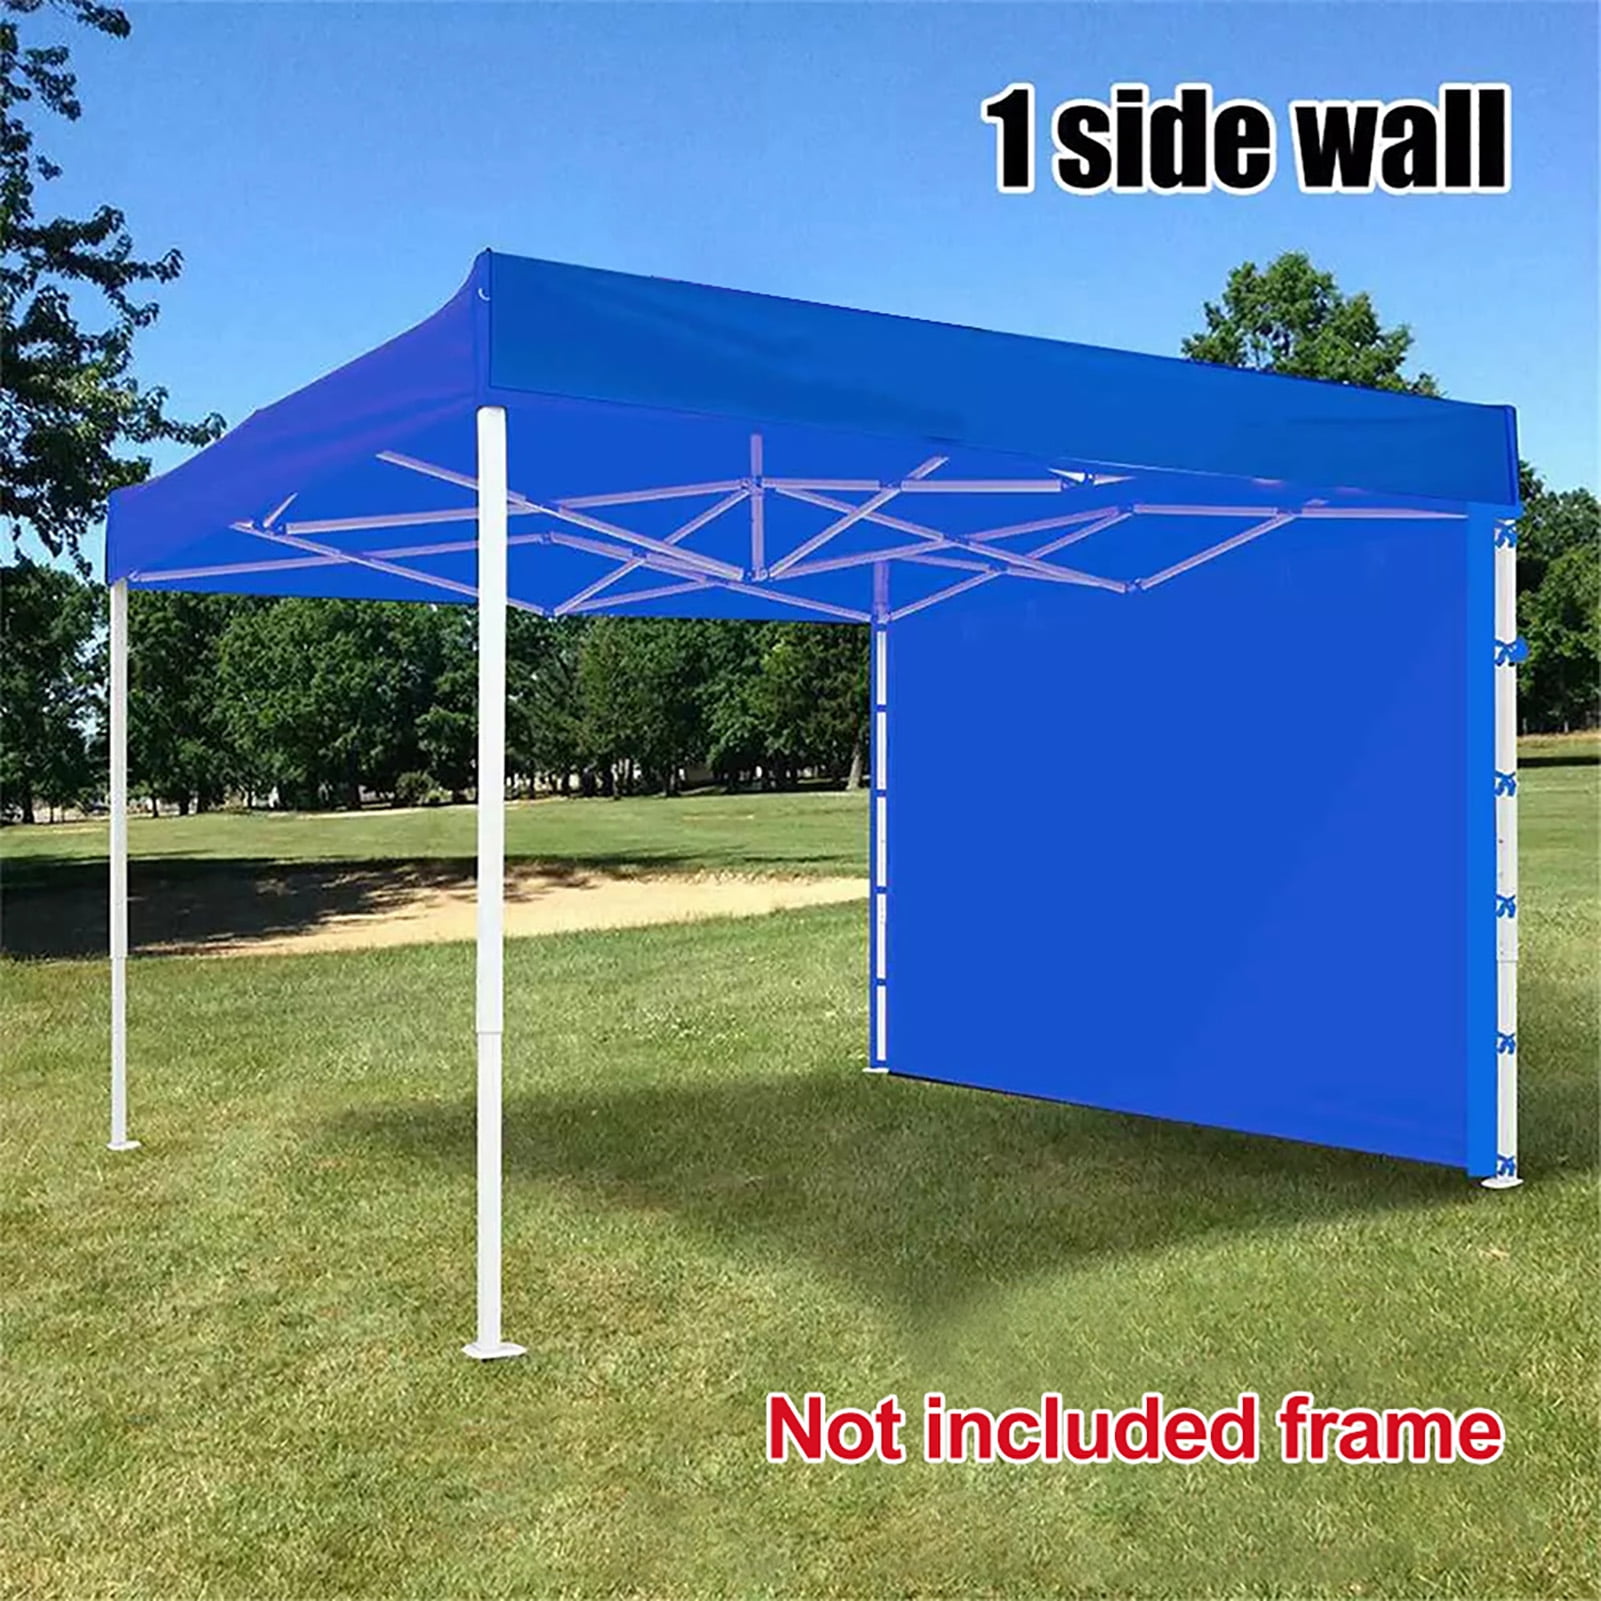 Details about   10X10Ft Canopy Top Replacement Patio Outdoor Sunshade Tent Cover Blue B9W5 